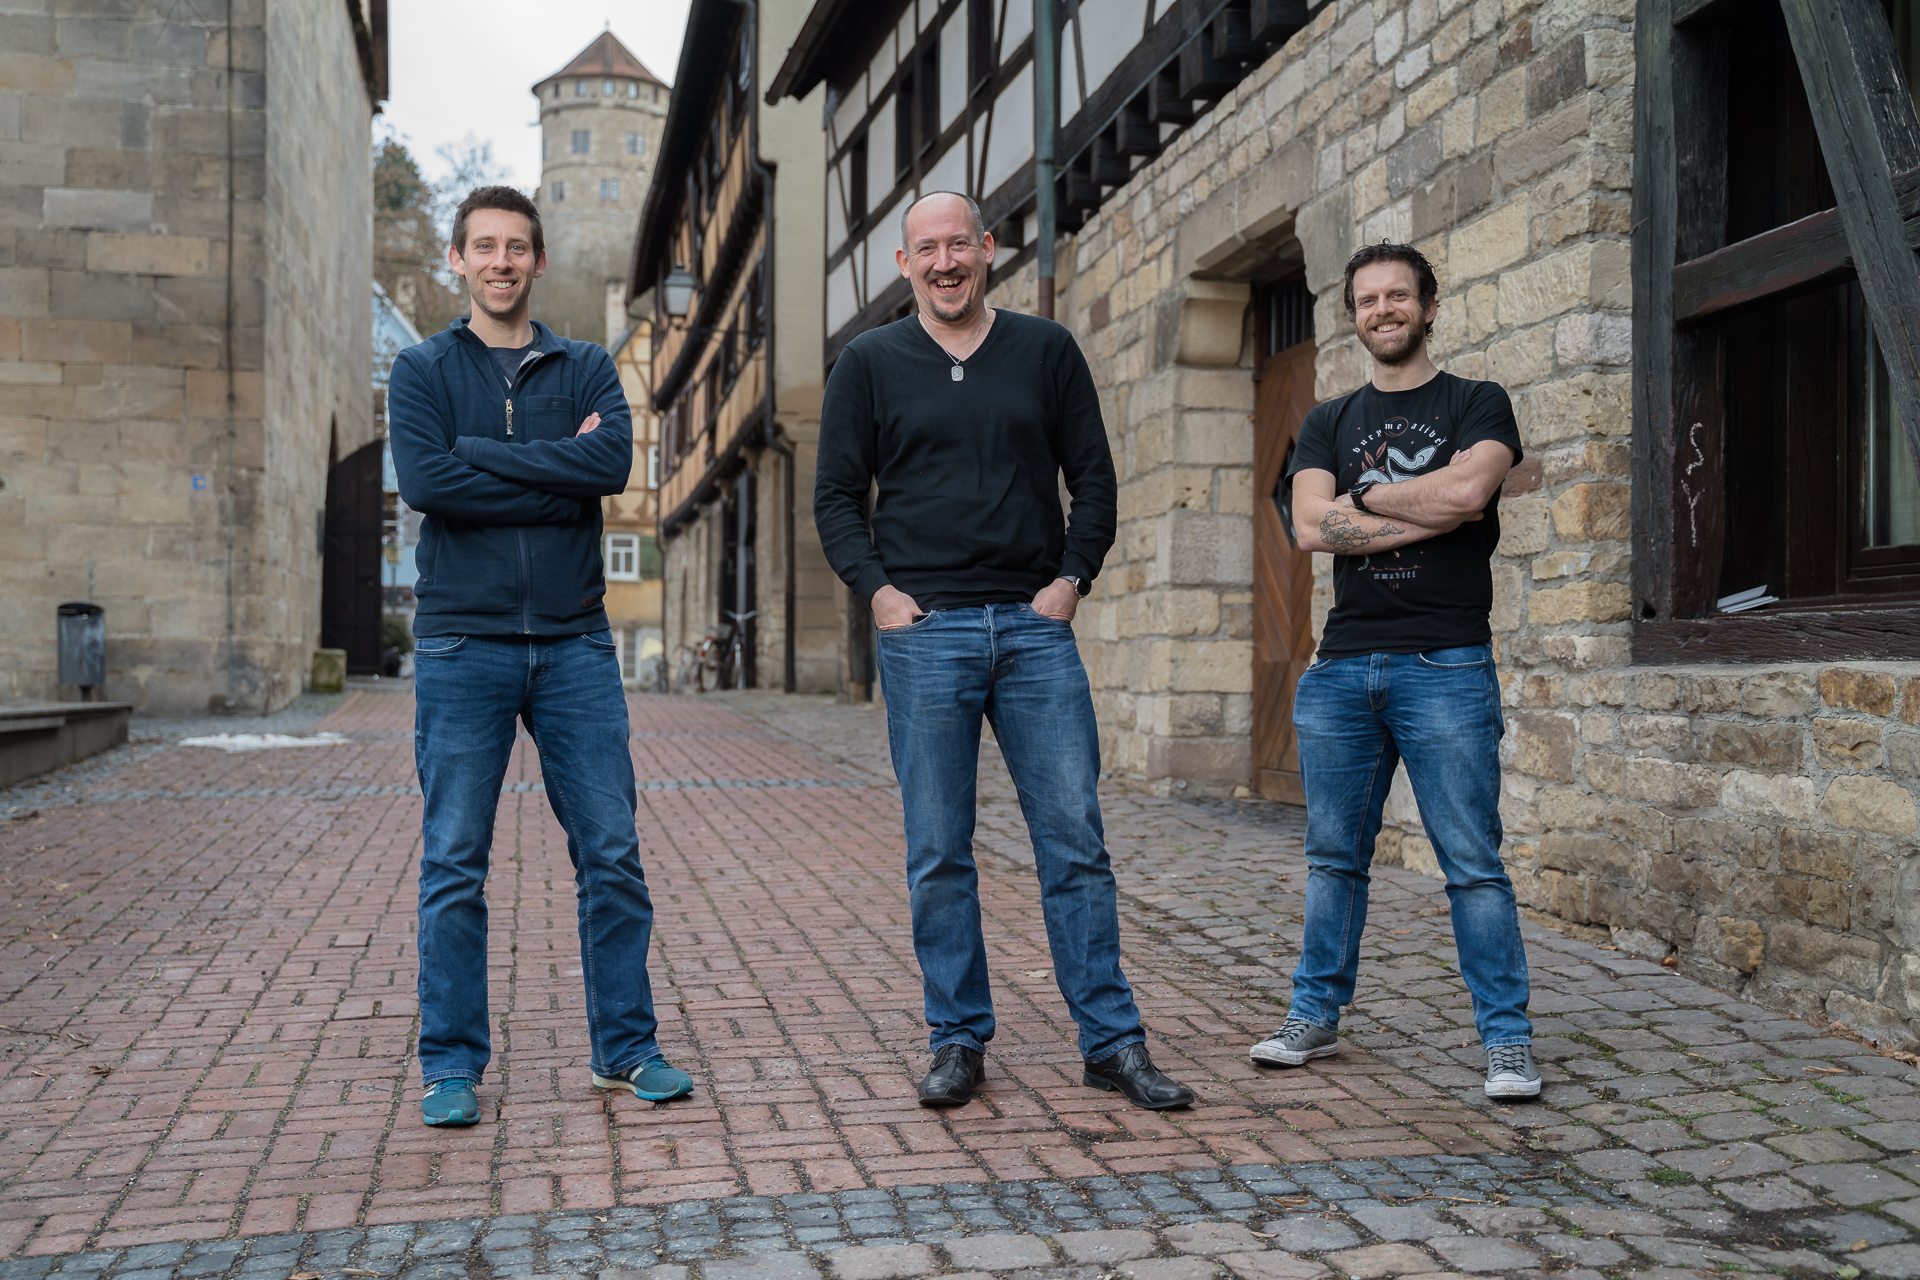 The three artificial intelligence experts are standing on cobblestones in Tübingen's old town.